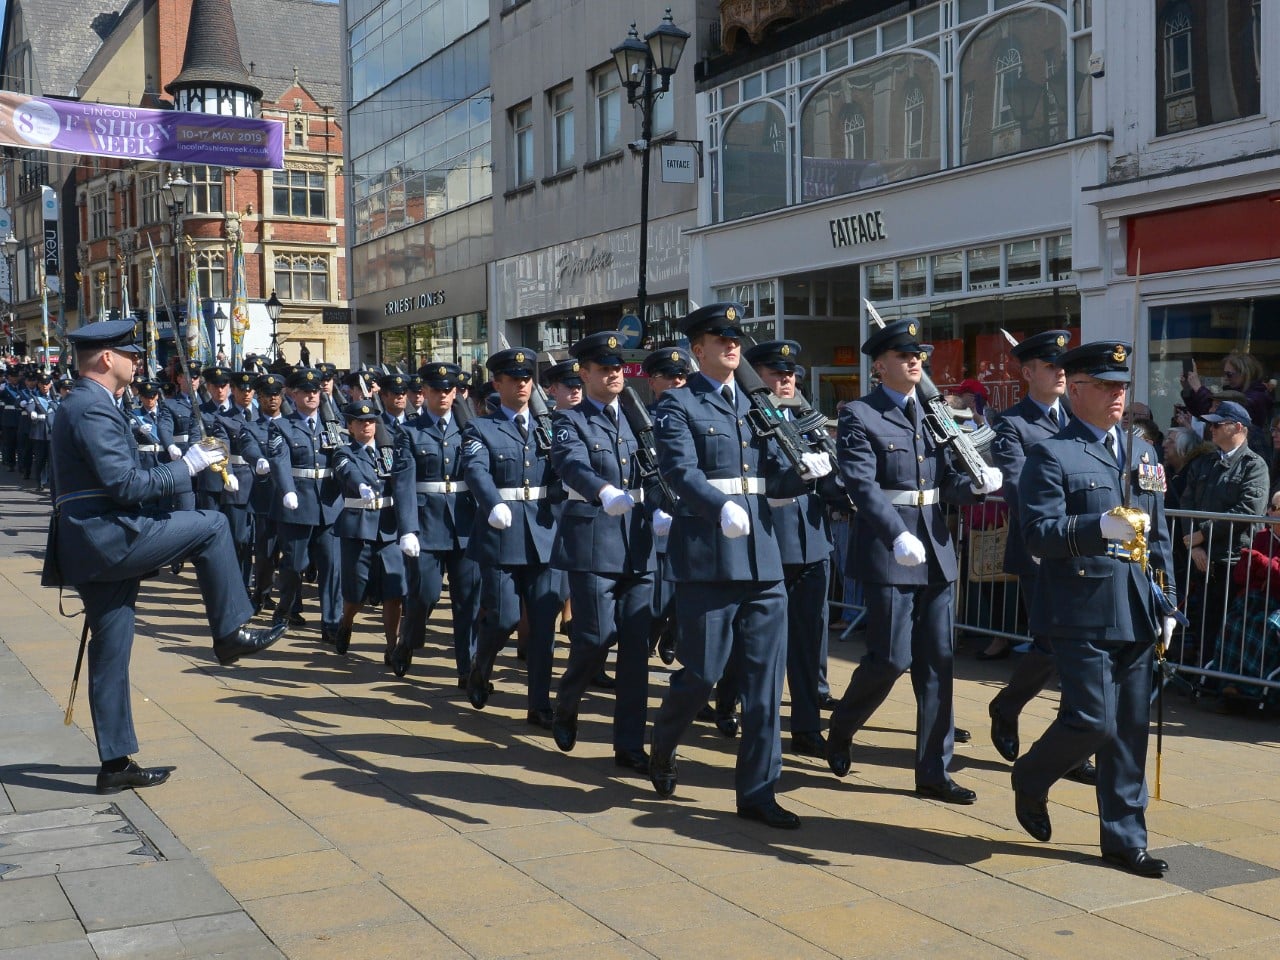 Image of Freedom of city parade